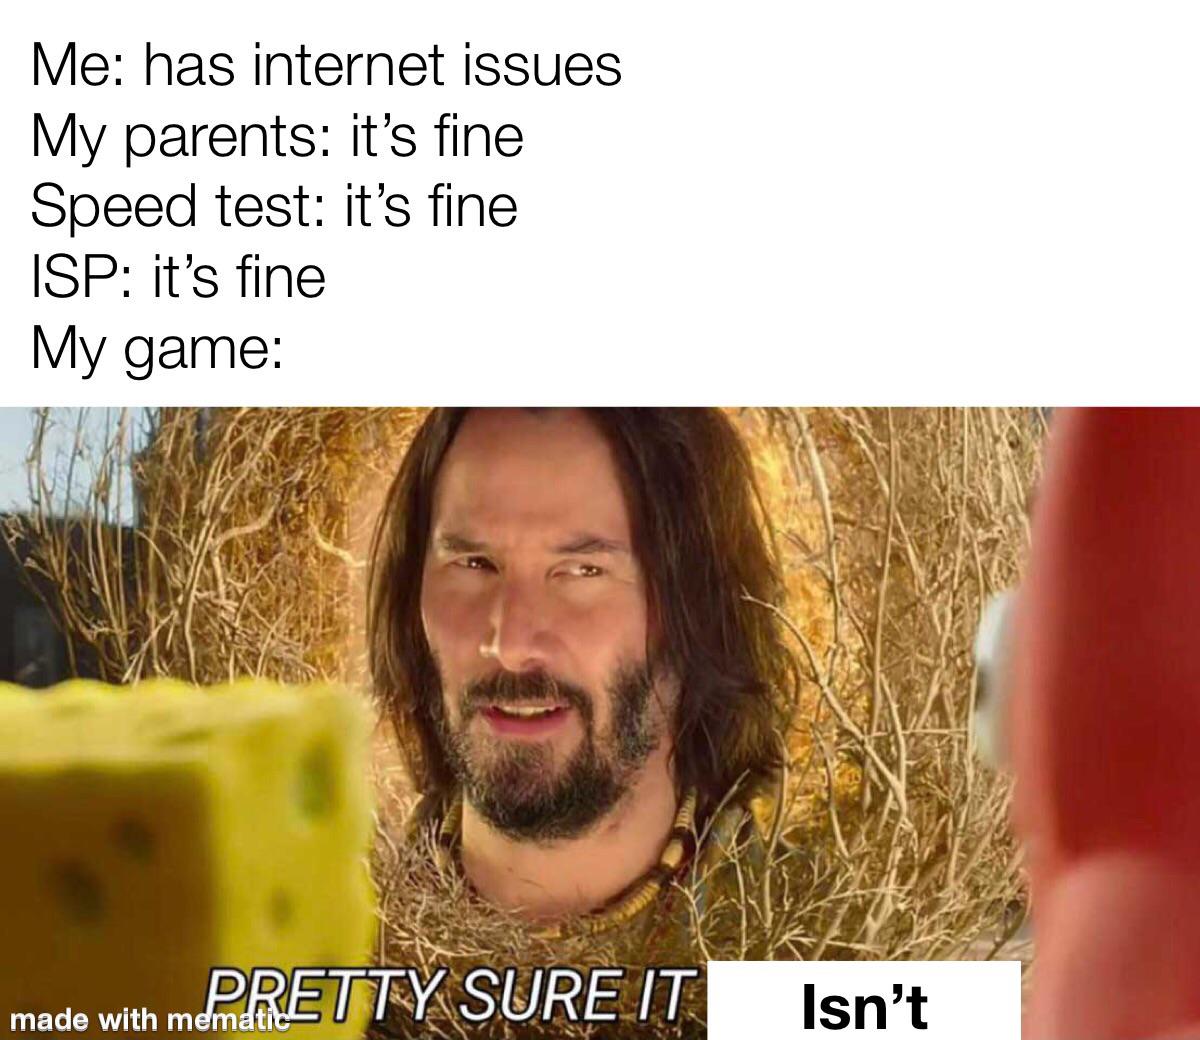 pretty sure it does - Me has internet issues My parents it's fine Speed test it's fine Isp it's fine My game Pretty Sure It made with mematic Isn't